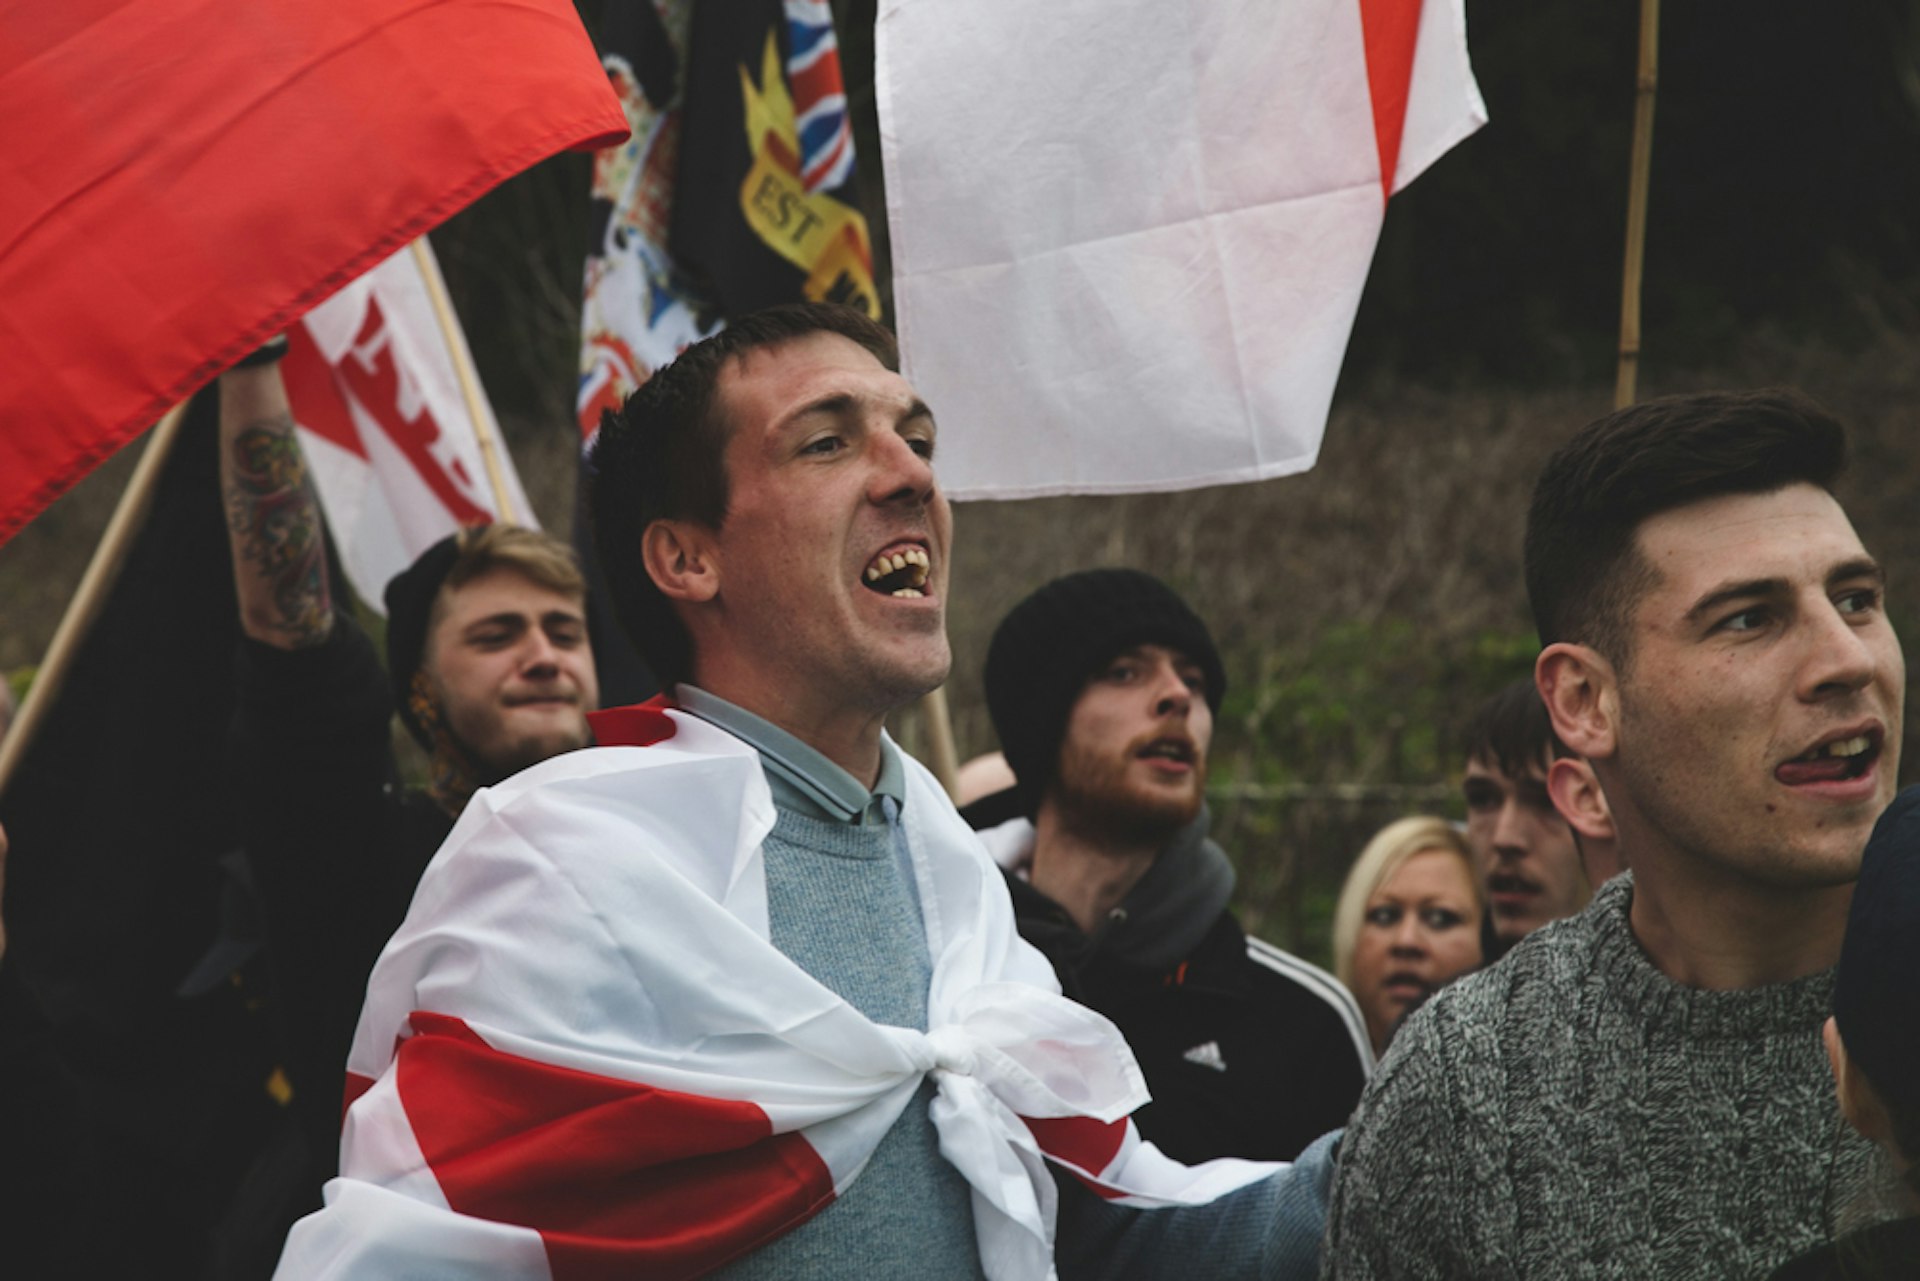 Photos of neo-Nazis marching through Dover to protest refugees arriving in England